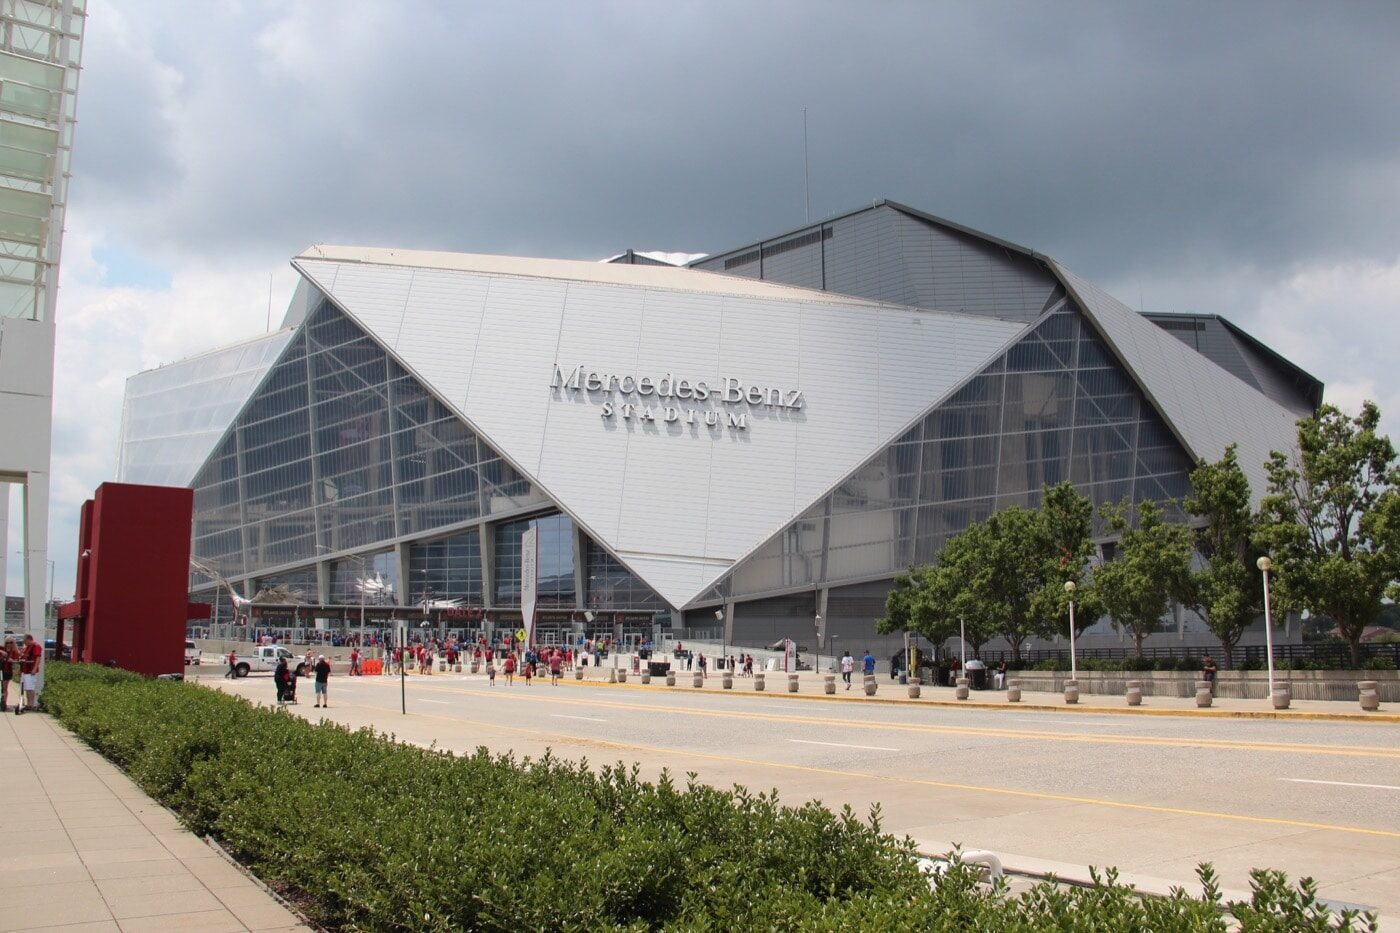 Did you know Mercedes-Benz Stadium is one of the cheapest stadiums for food and drink?